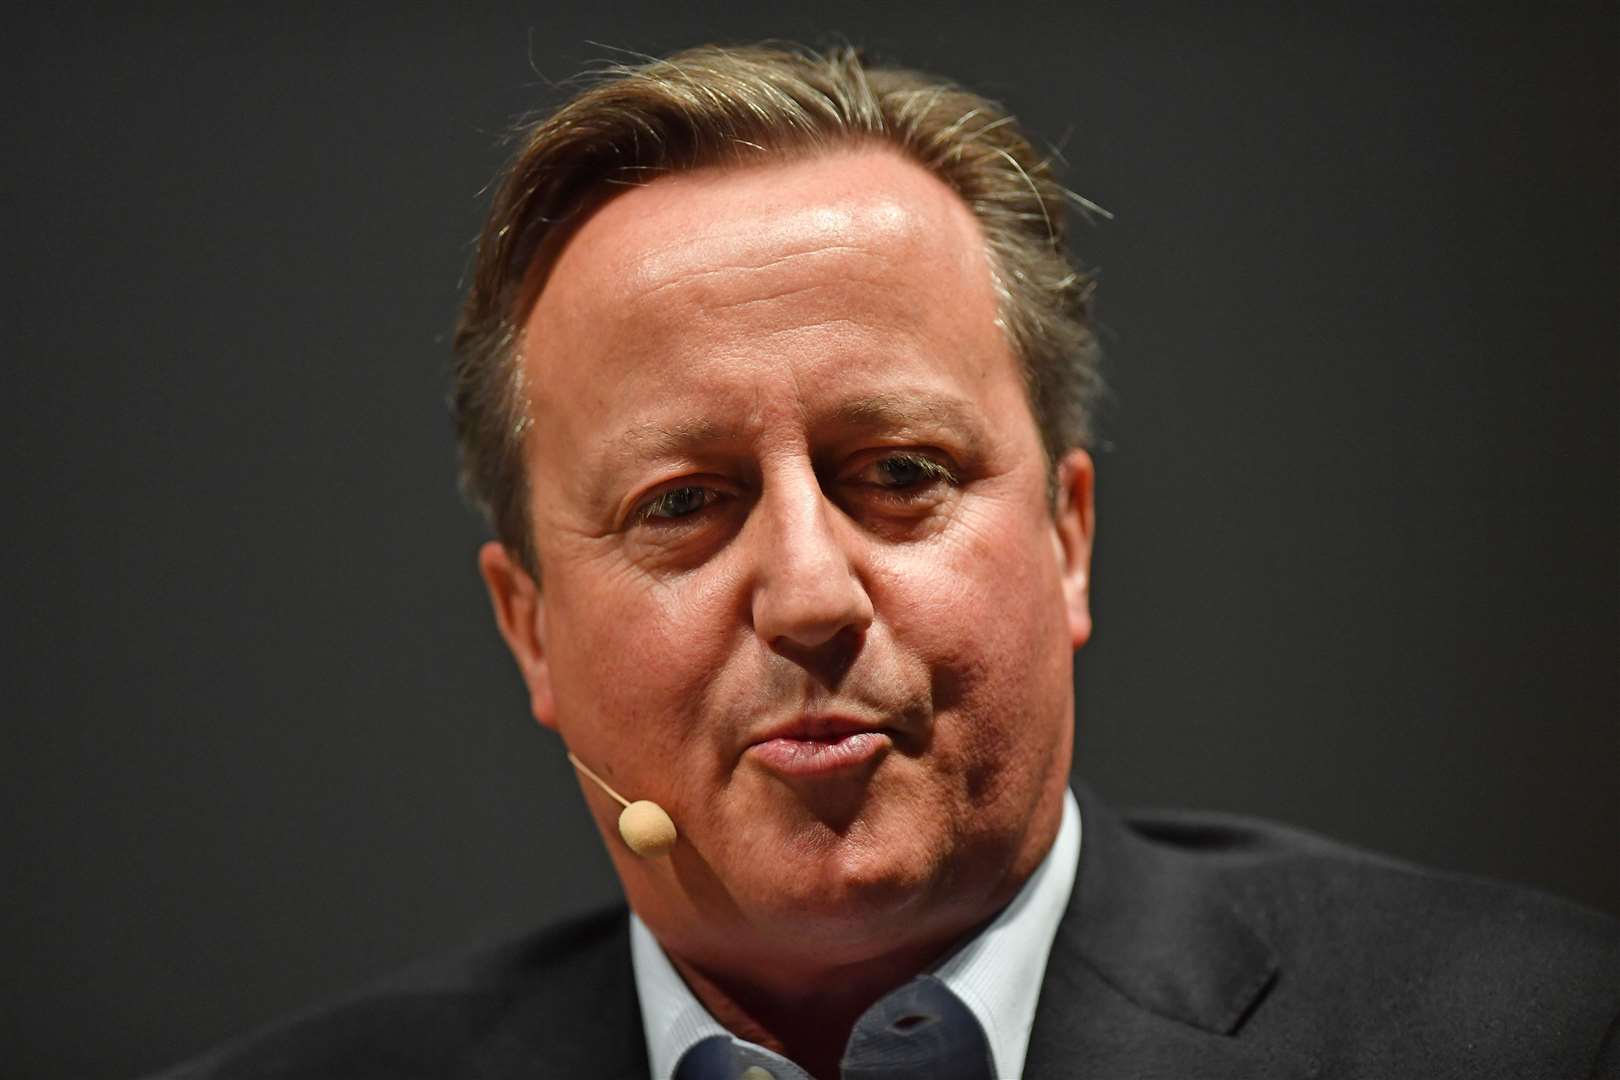 The Government has been facing questions over former prime minister David Cameron’s links with Greensill (Jacob King/PA)